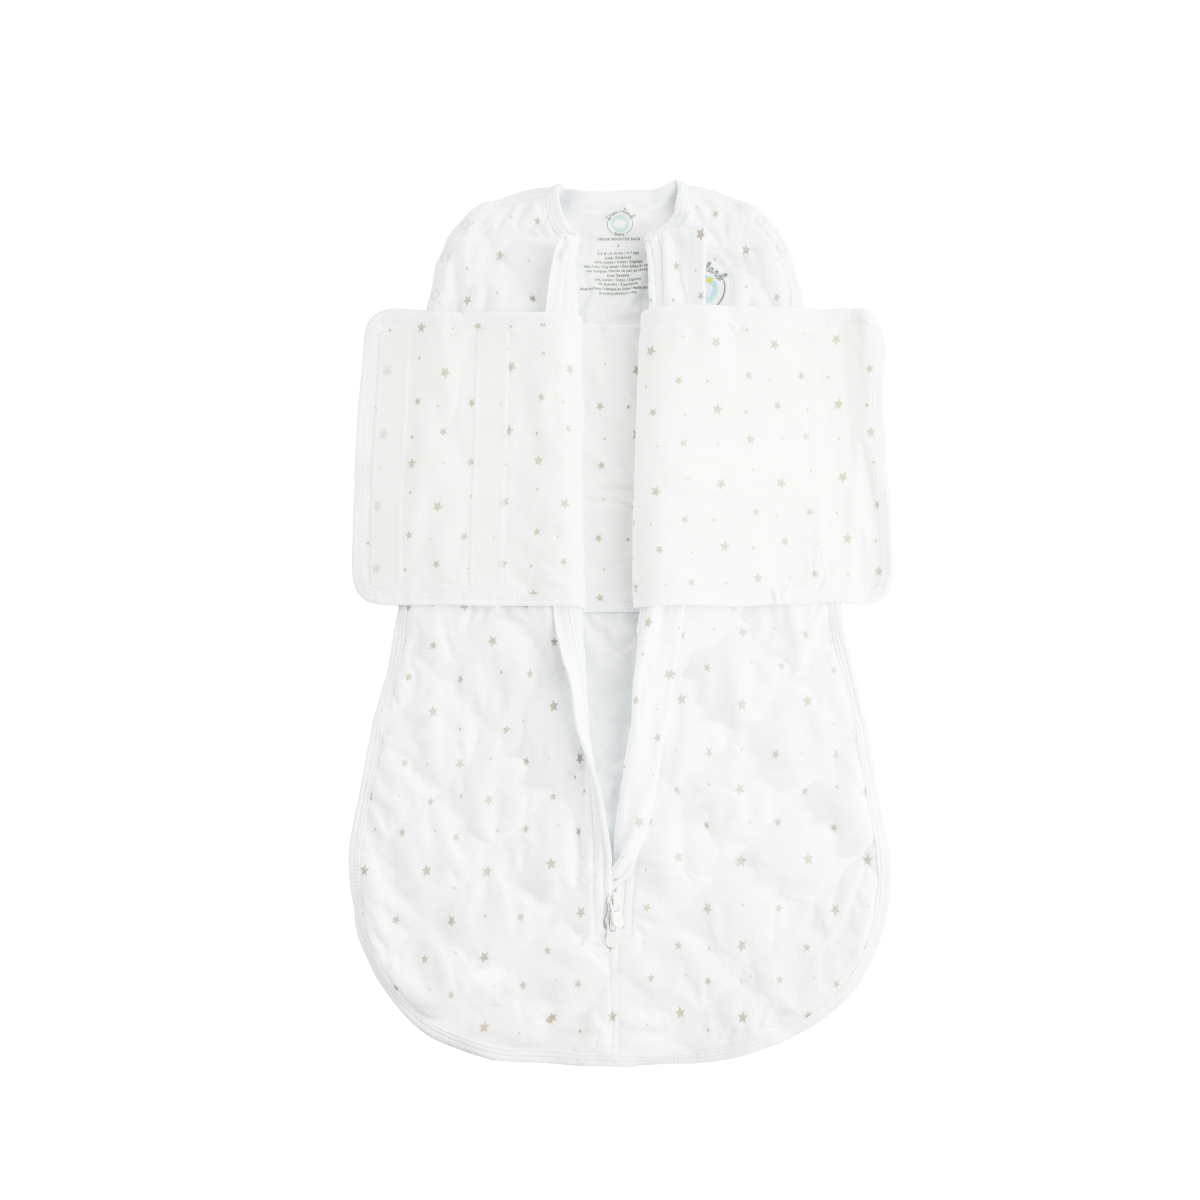 Dream Weighted Sleep Swaddle